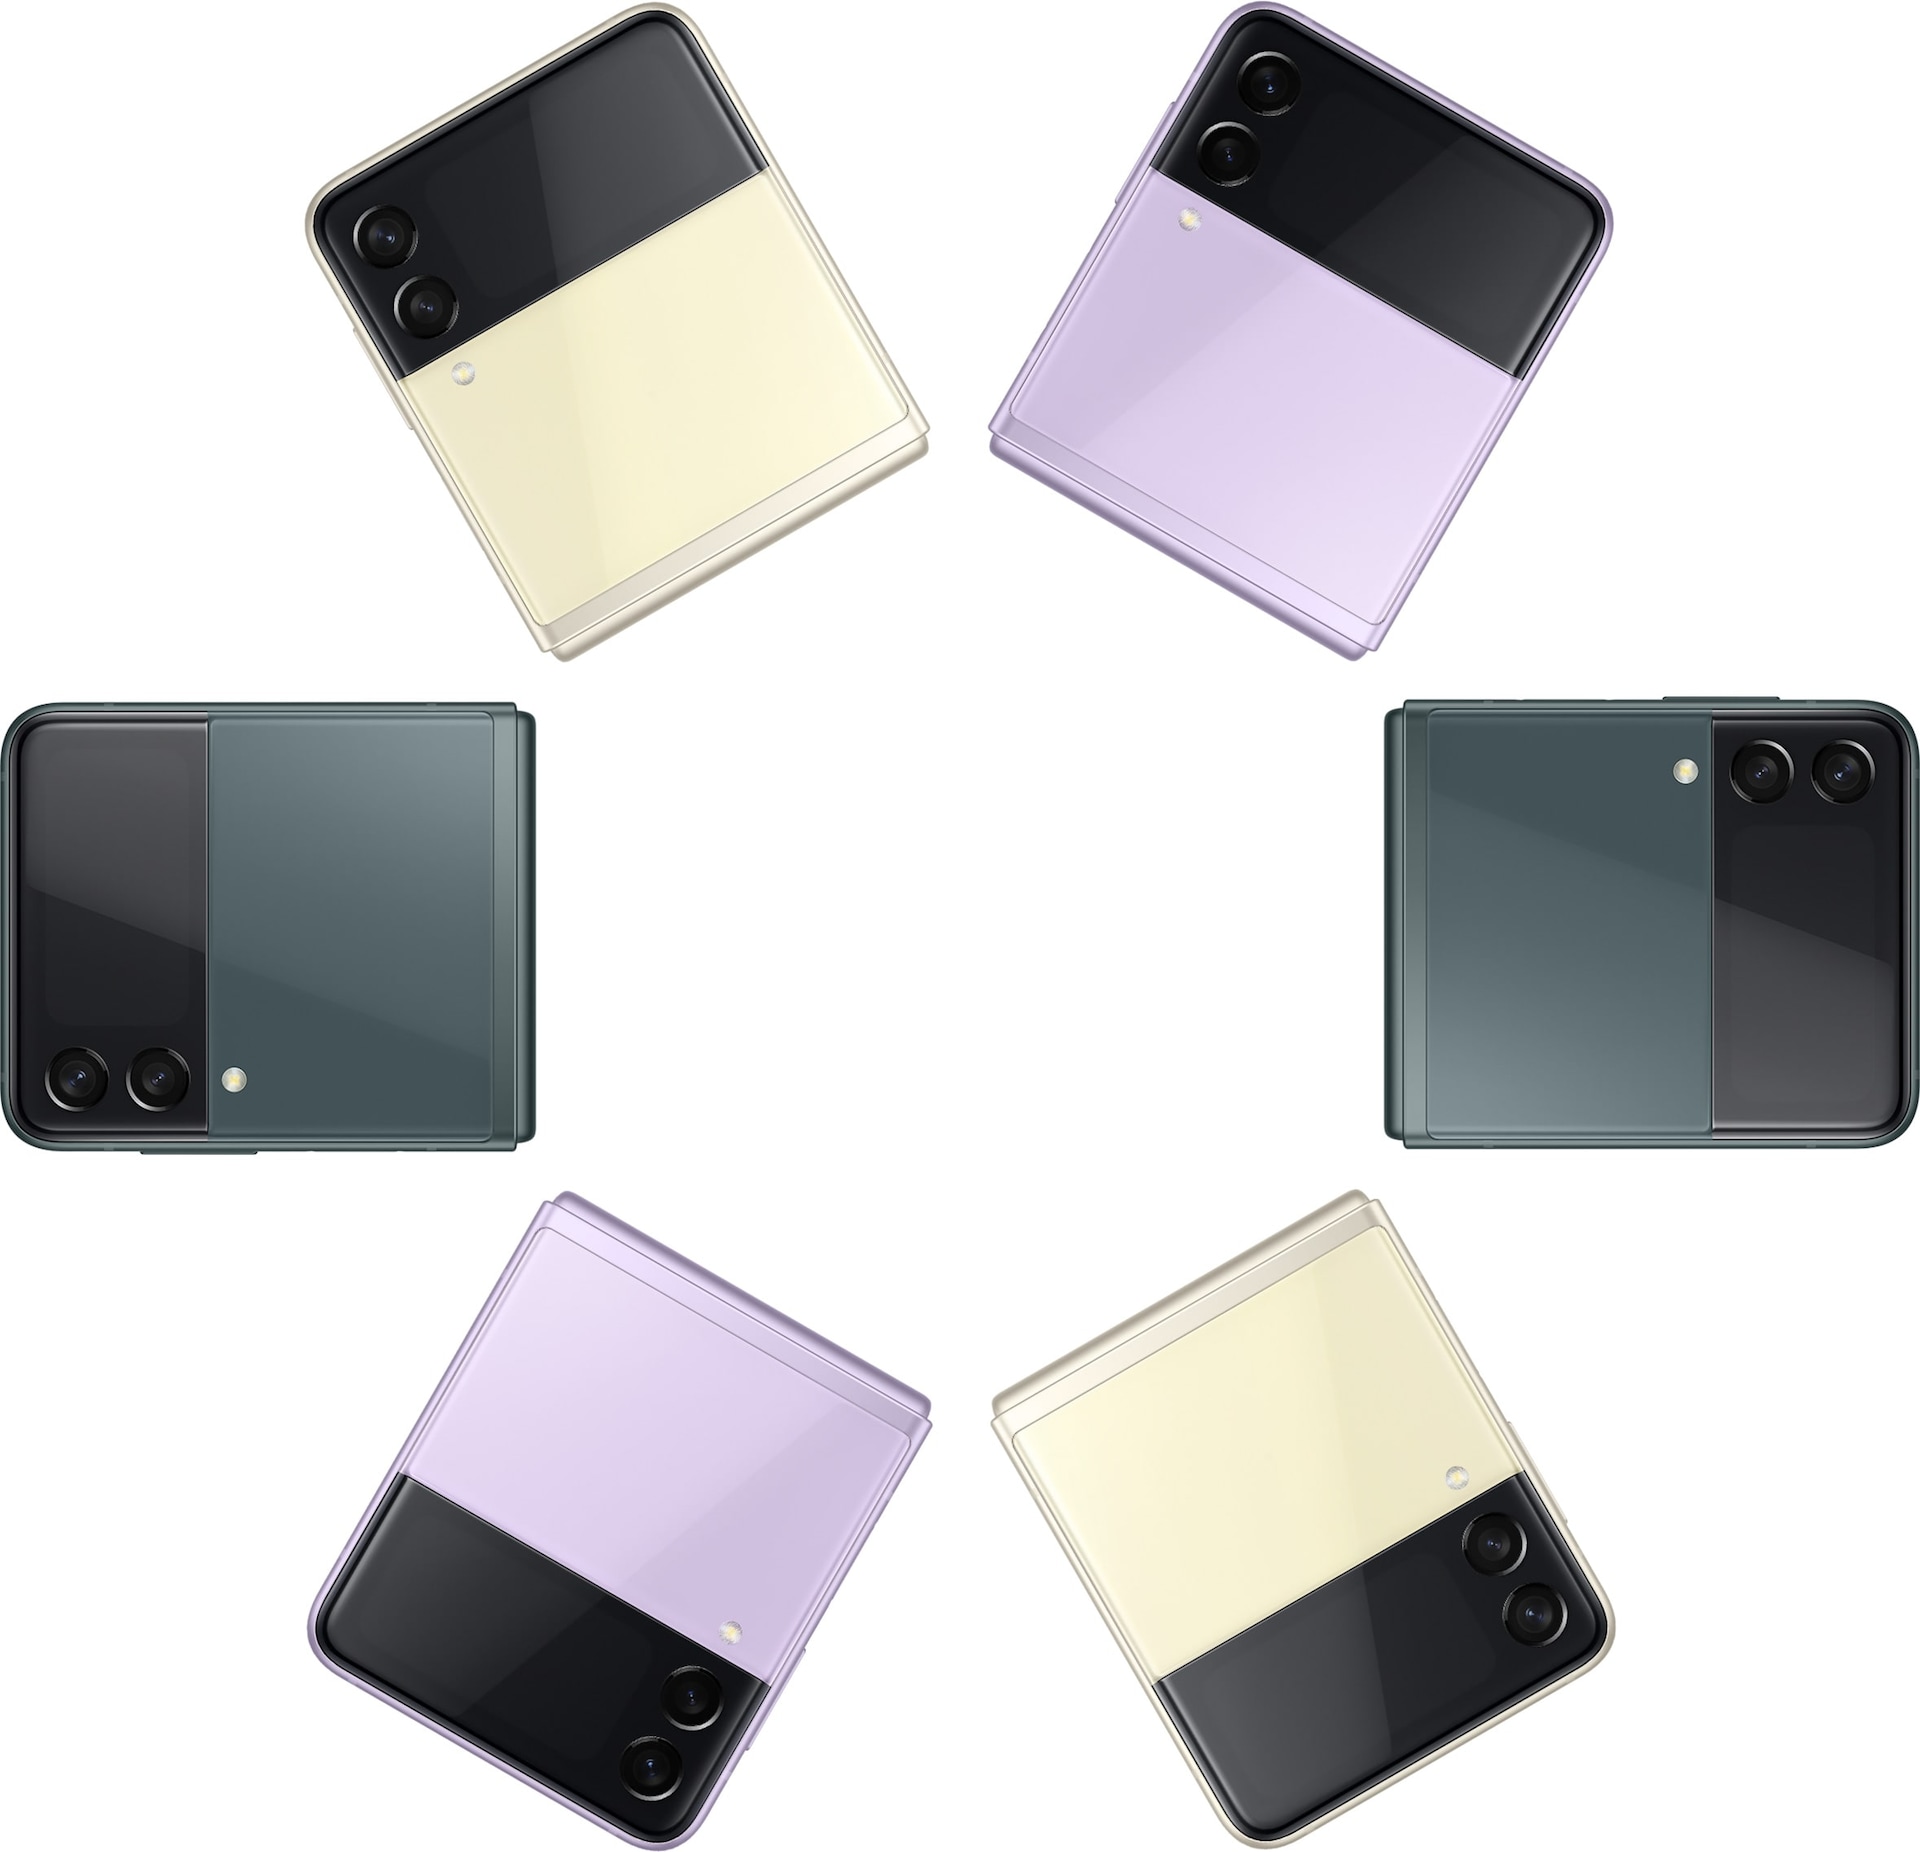 Six Galaxy Z Flip3 5G phones, all folded and seen from the Front Cover. Two in Cream, two in Lavender and two in Green, all alternating colours.